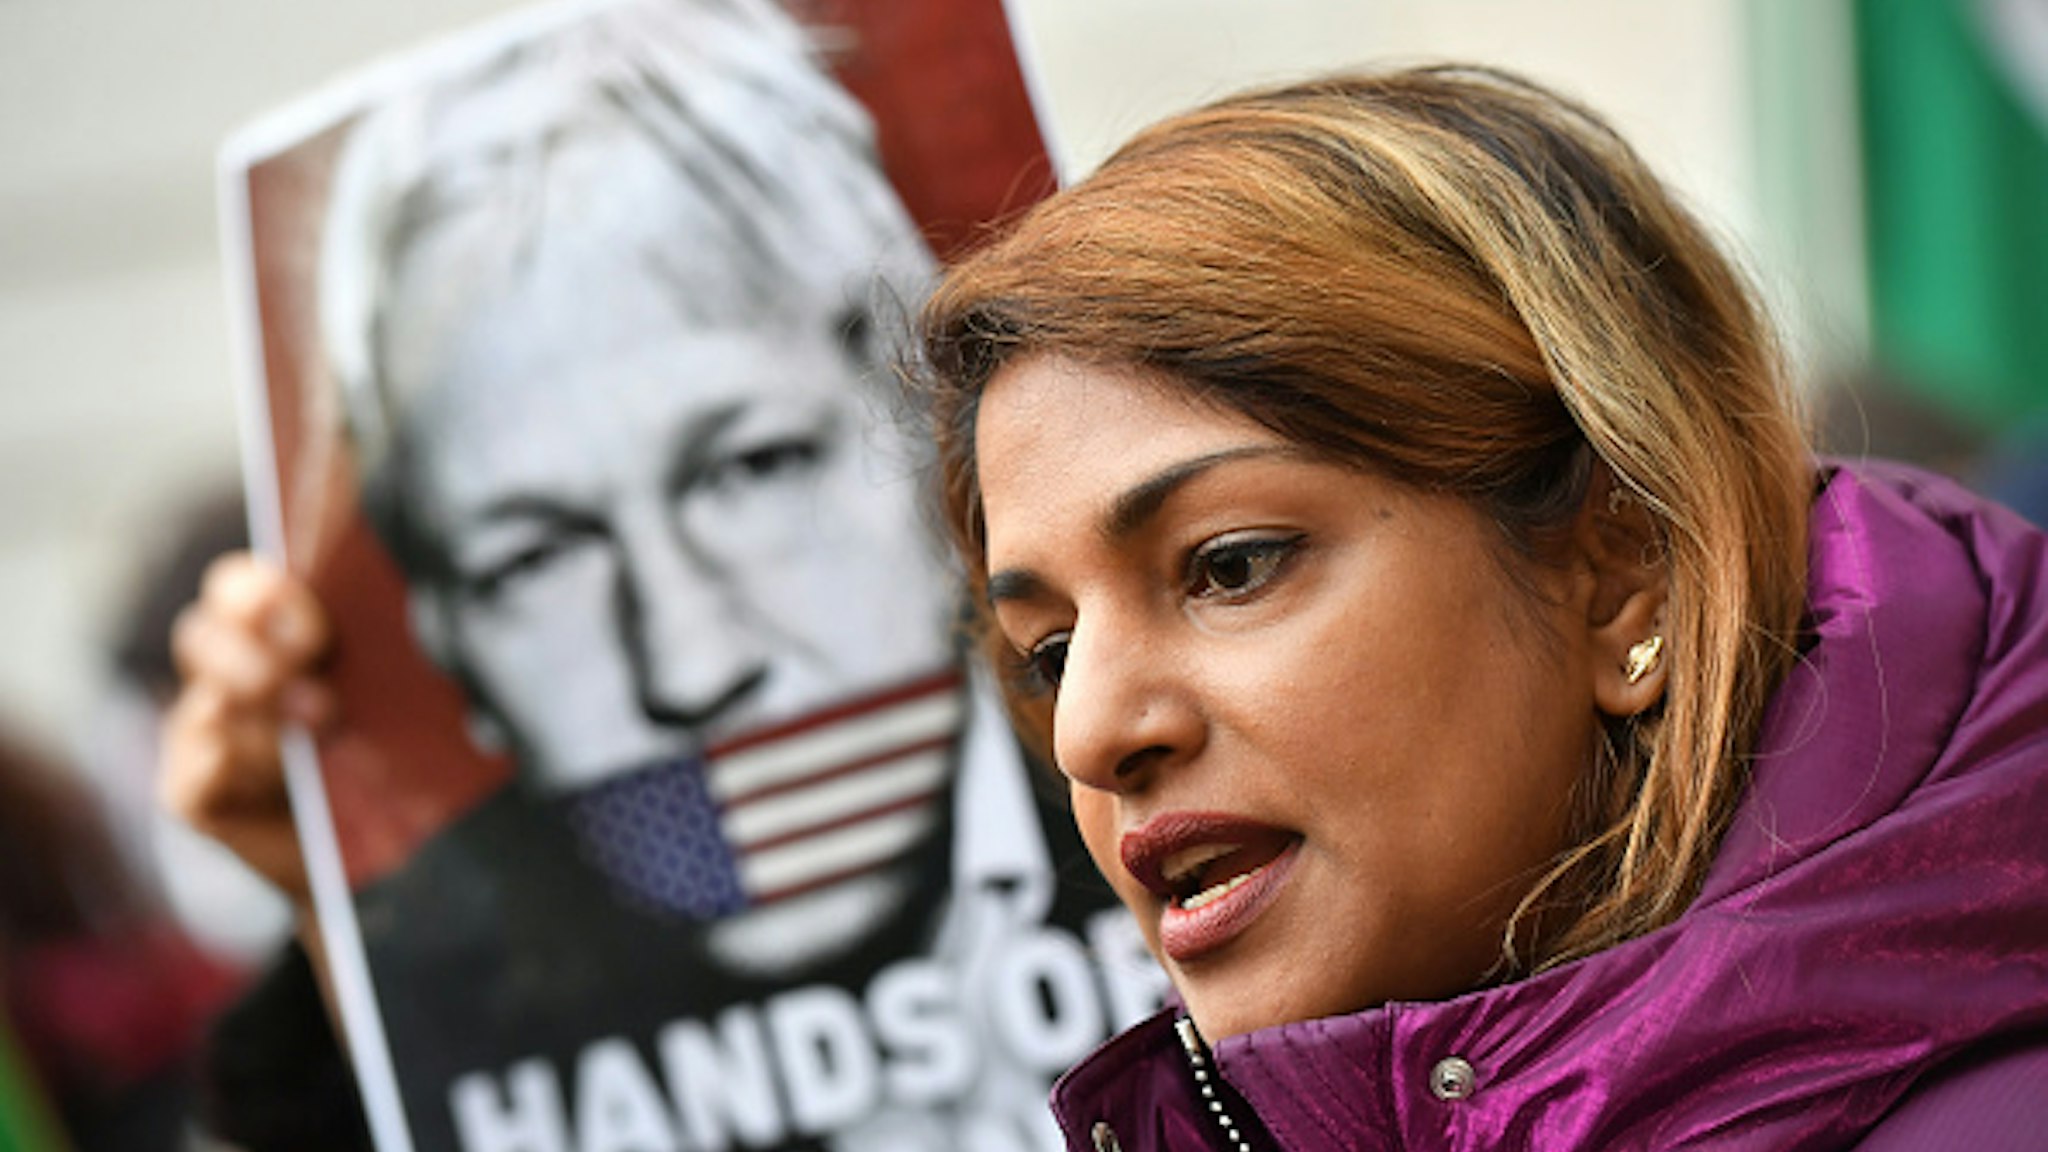 Rapper M.I.A. speaks to the media outside Westminster Magistrates Court, London where Wikileaks founder Julian Assange is appearing for an administrative hearing relating to his extradition to the United States over allegations that he conspired to break into a classified Pentagon computer.